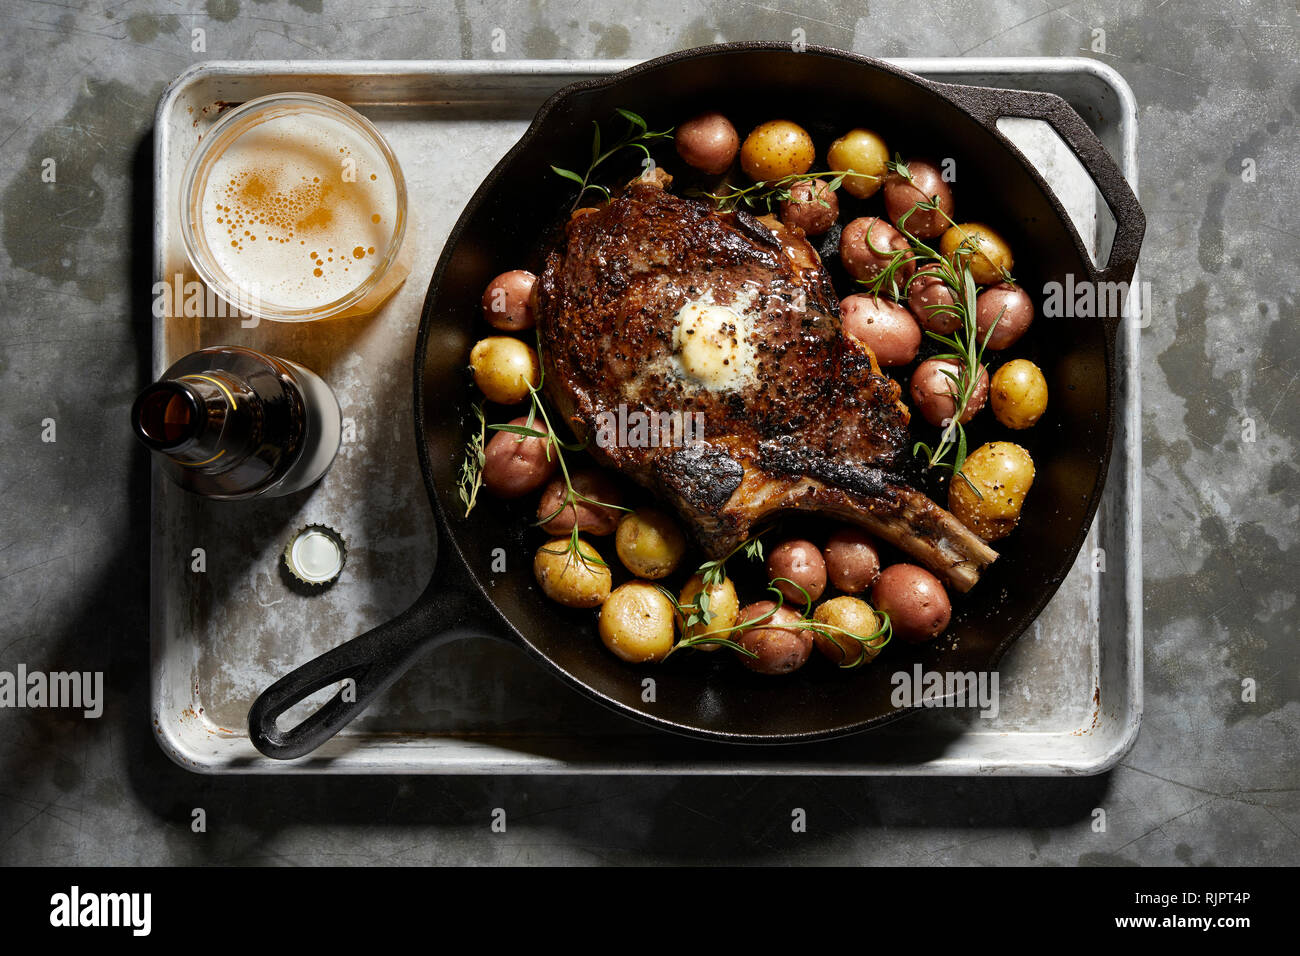 Skillet with large tomahawk steak & potatoes, overhead view Stock Photo